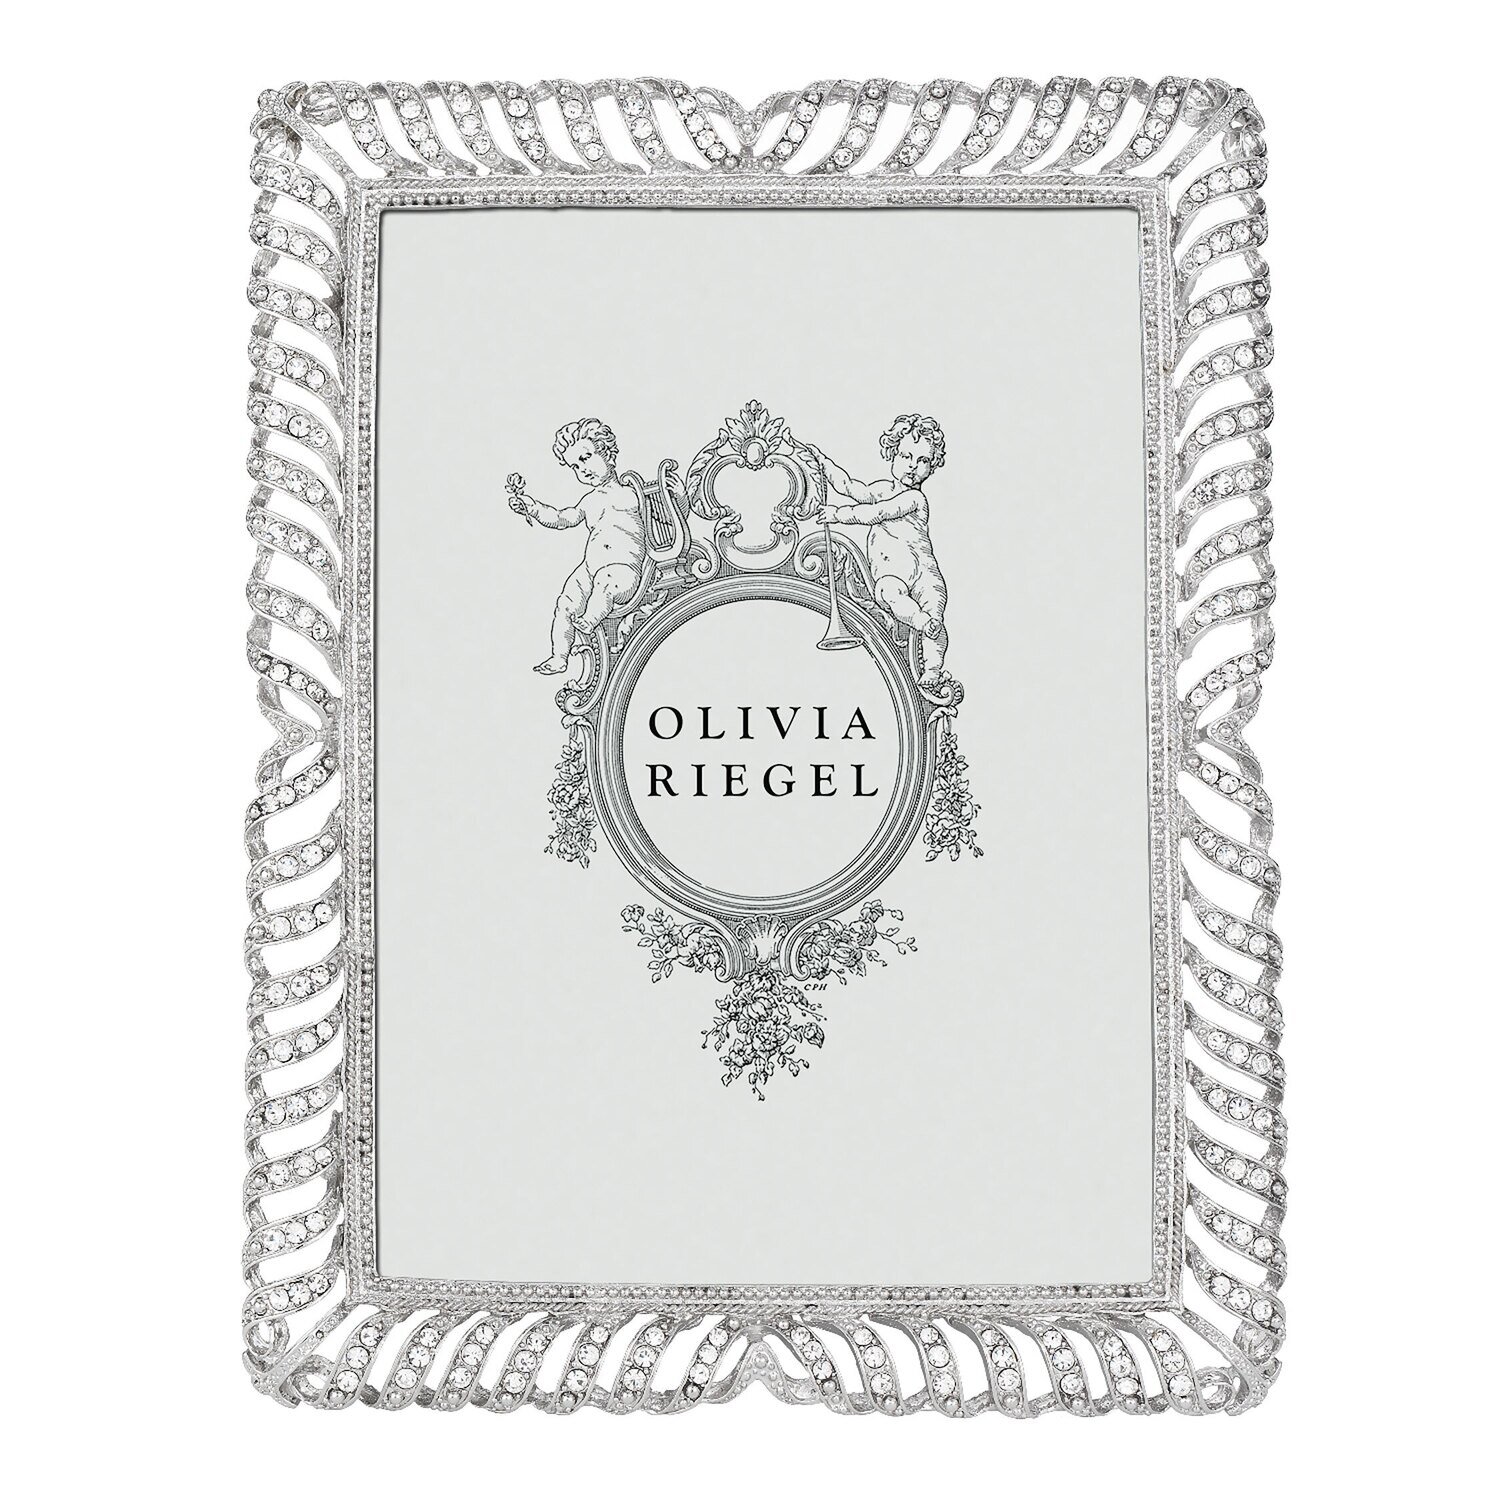 Olivia Riegel Silver Palmer 5 x 7 Inch Picture Frame RT1371